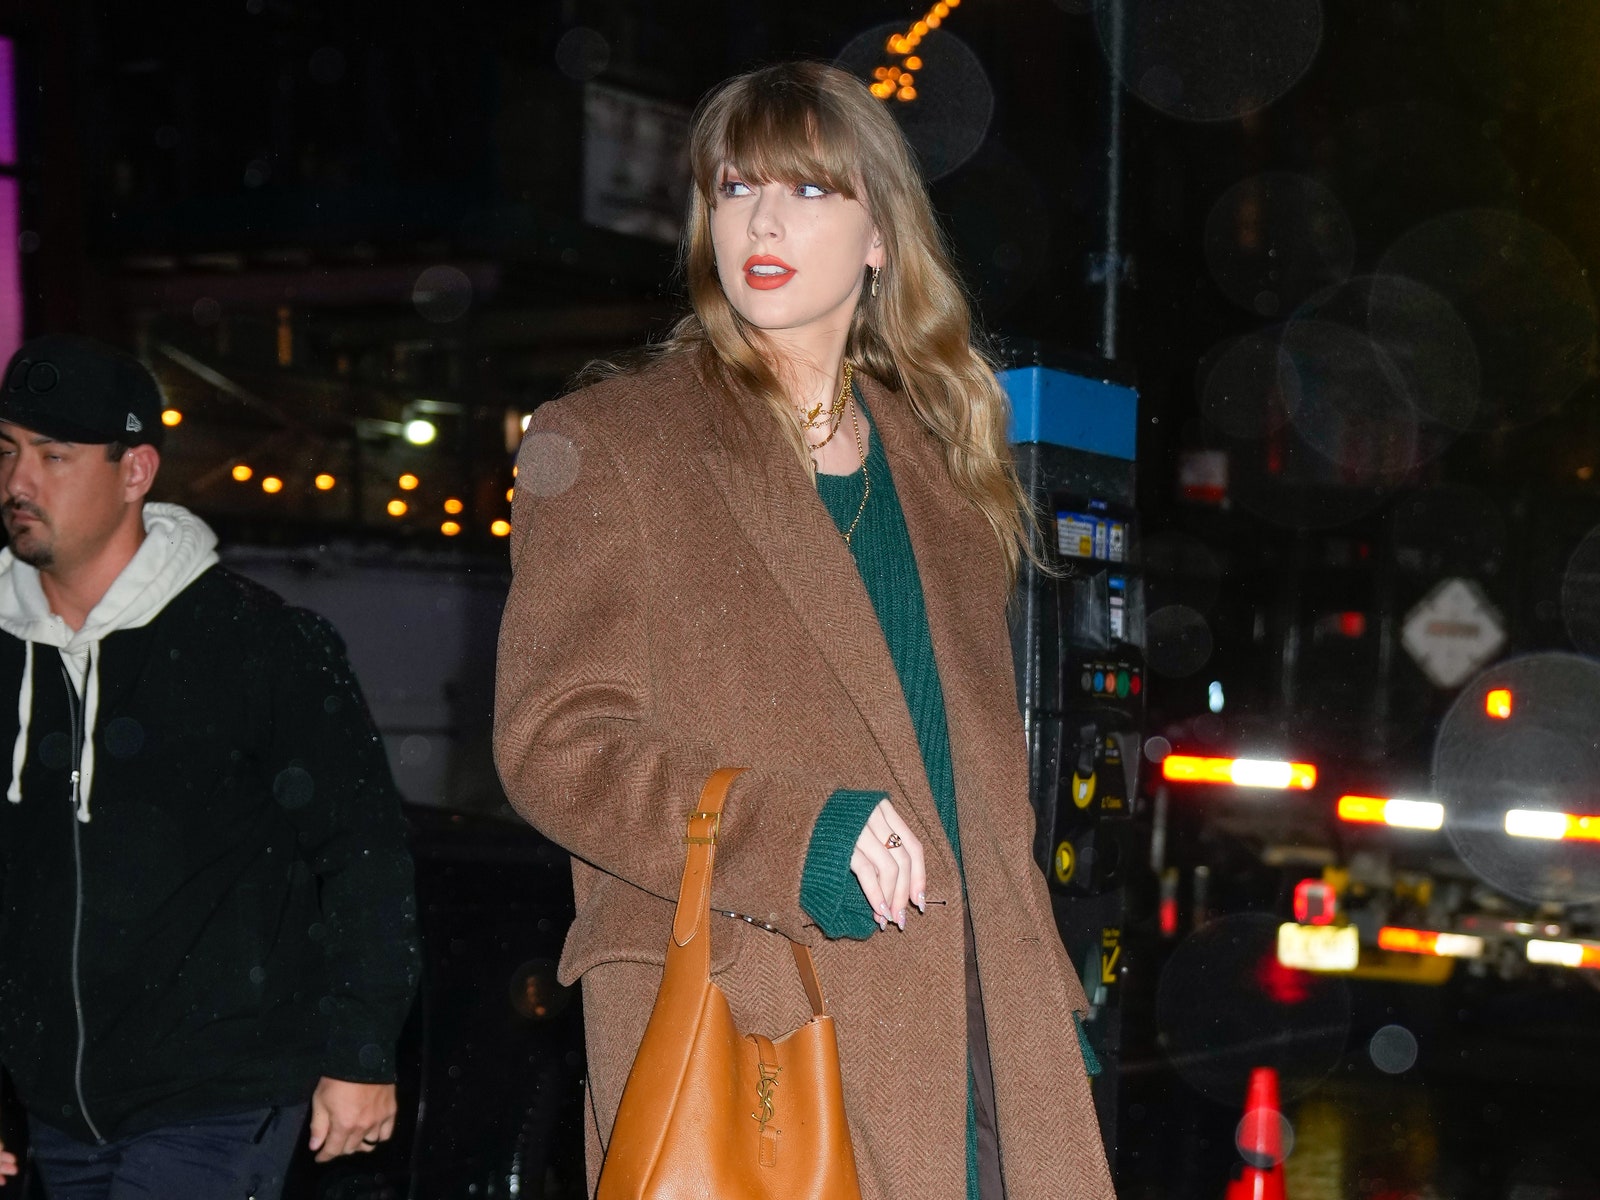 Taylor Swift’s Green Sweaterdress and Brown Coat Combo Screams Evermore to Me